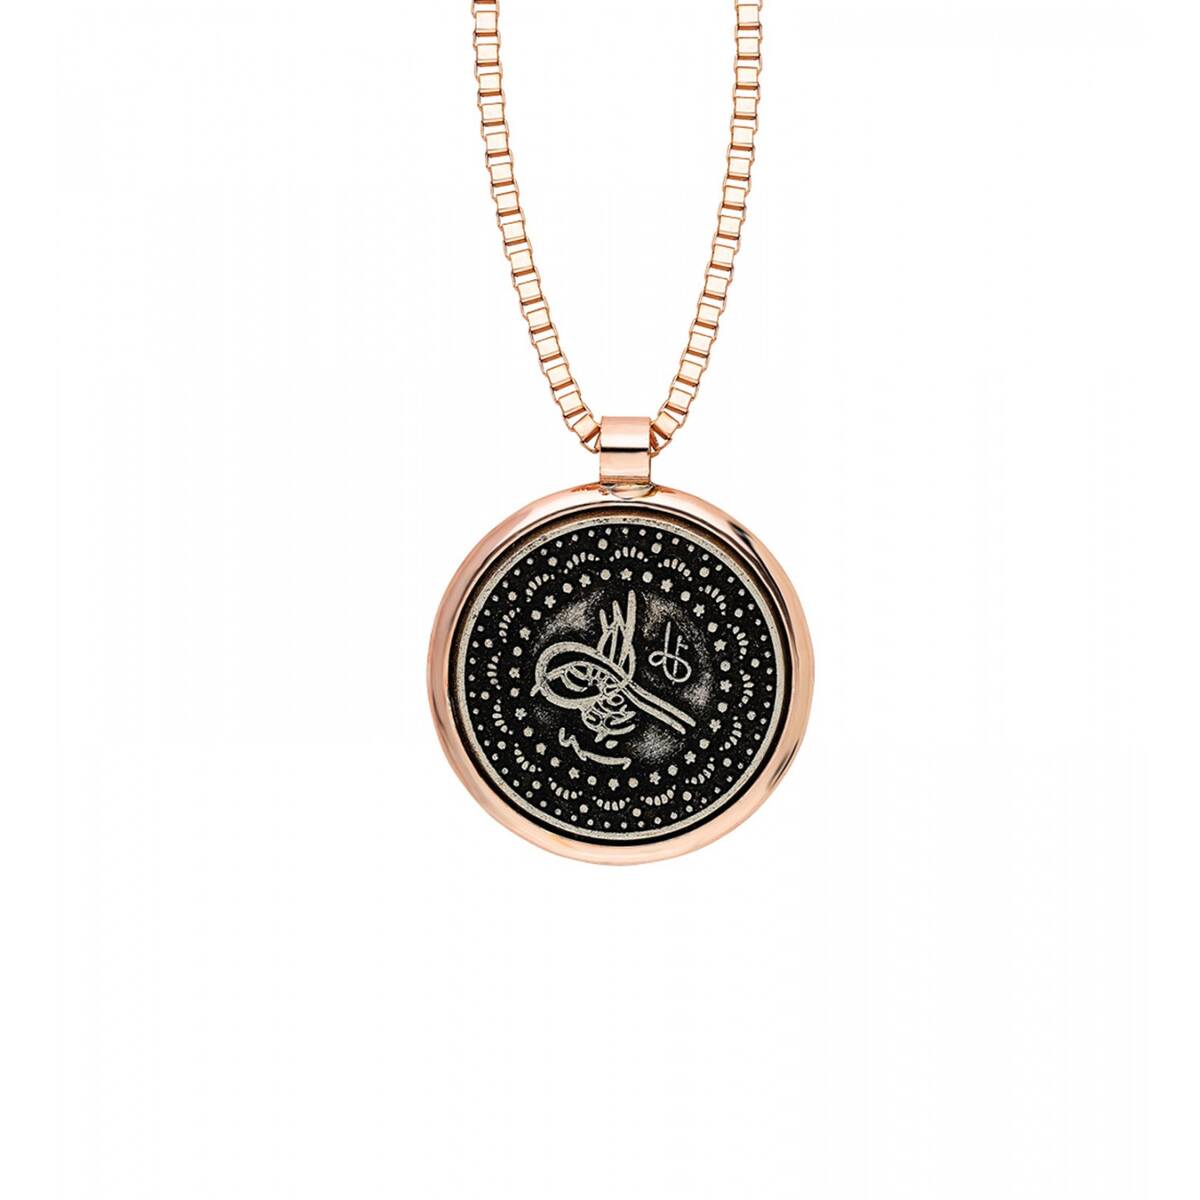 Women's necklace with Ottoman logo